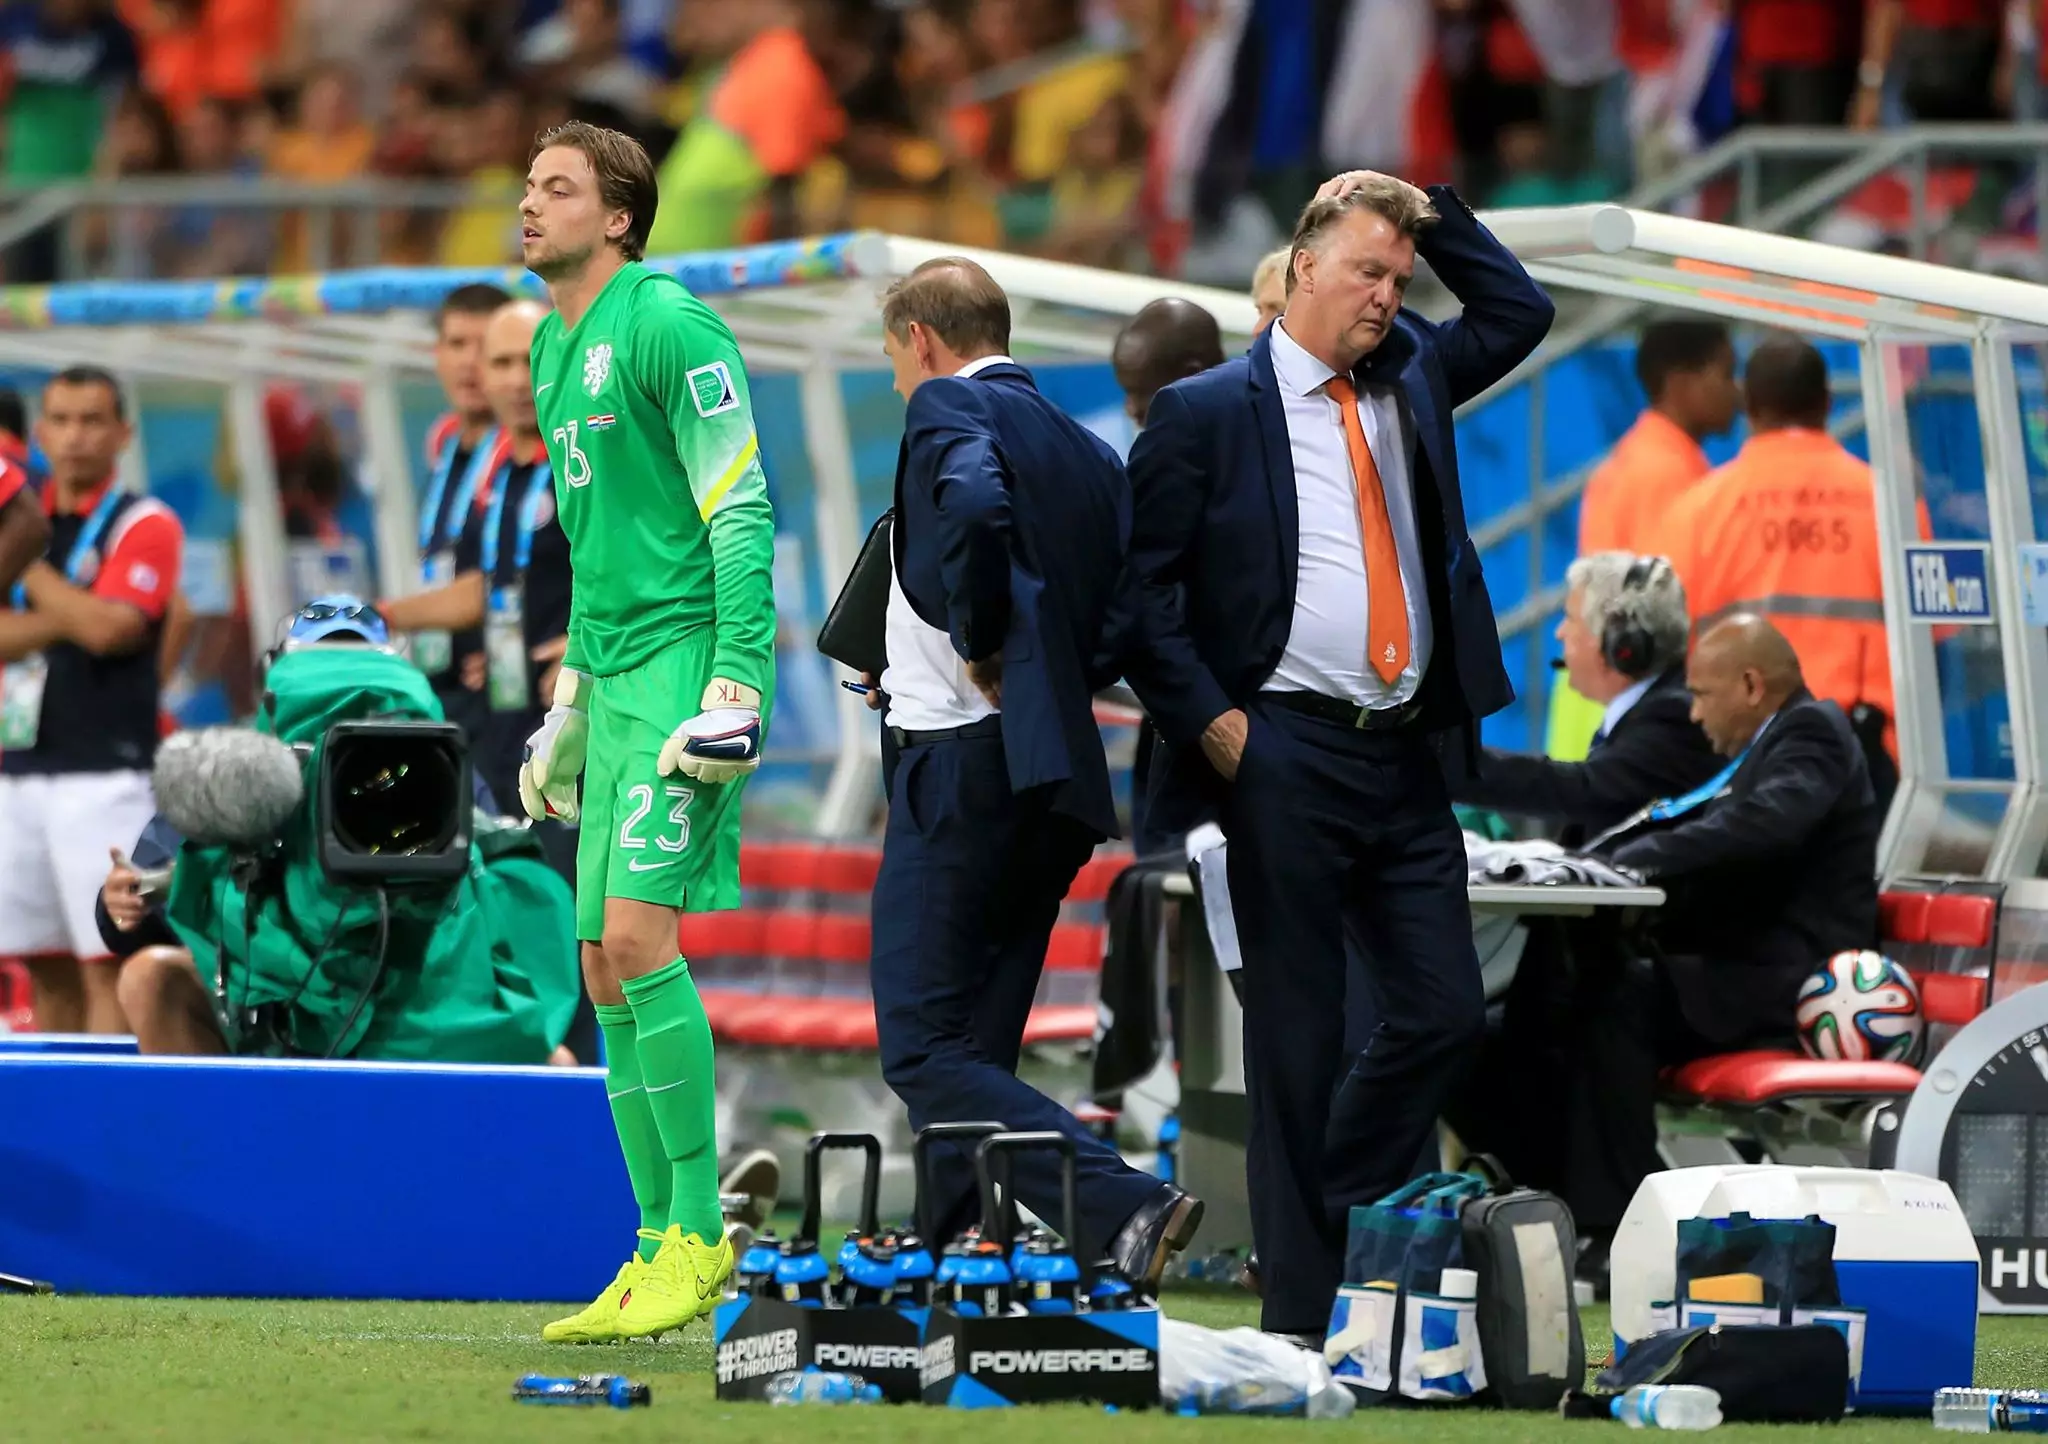 Krul comes on just before the shoot-out. Image: PA Images